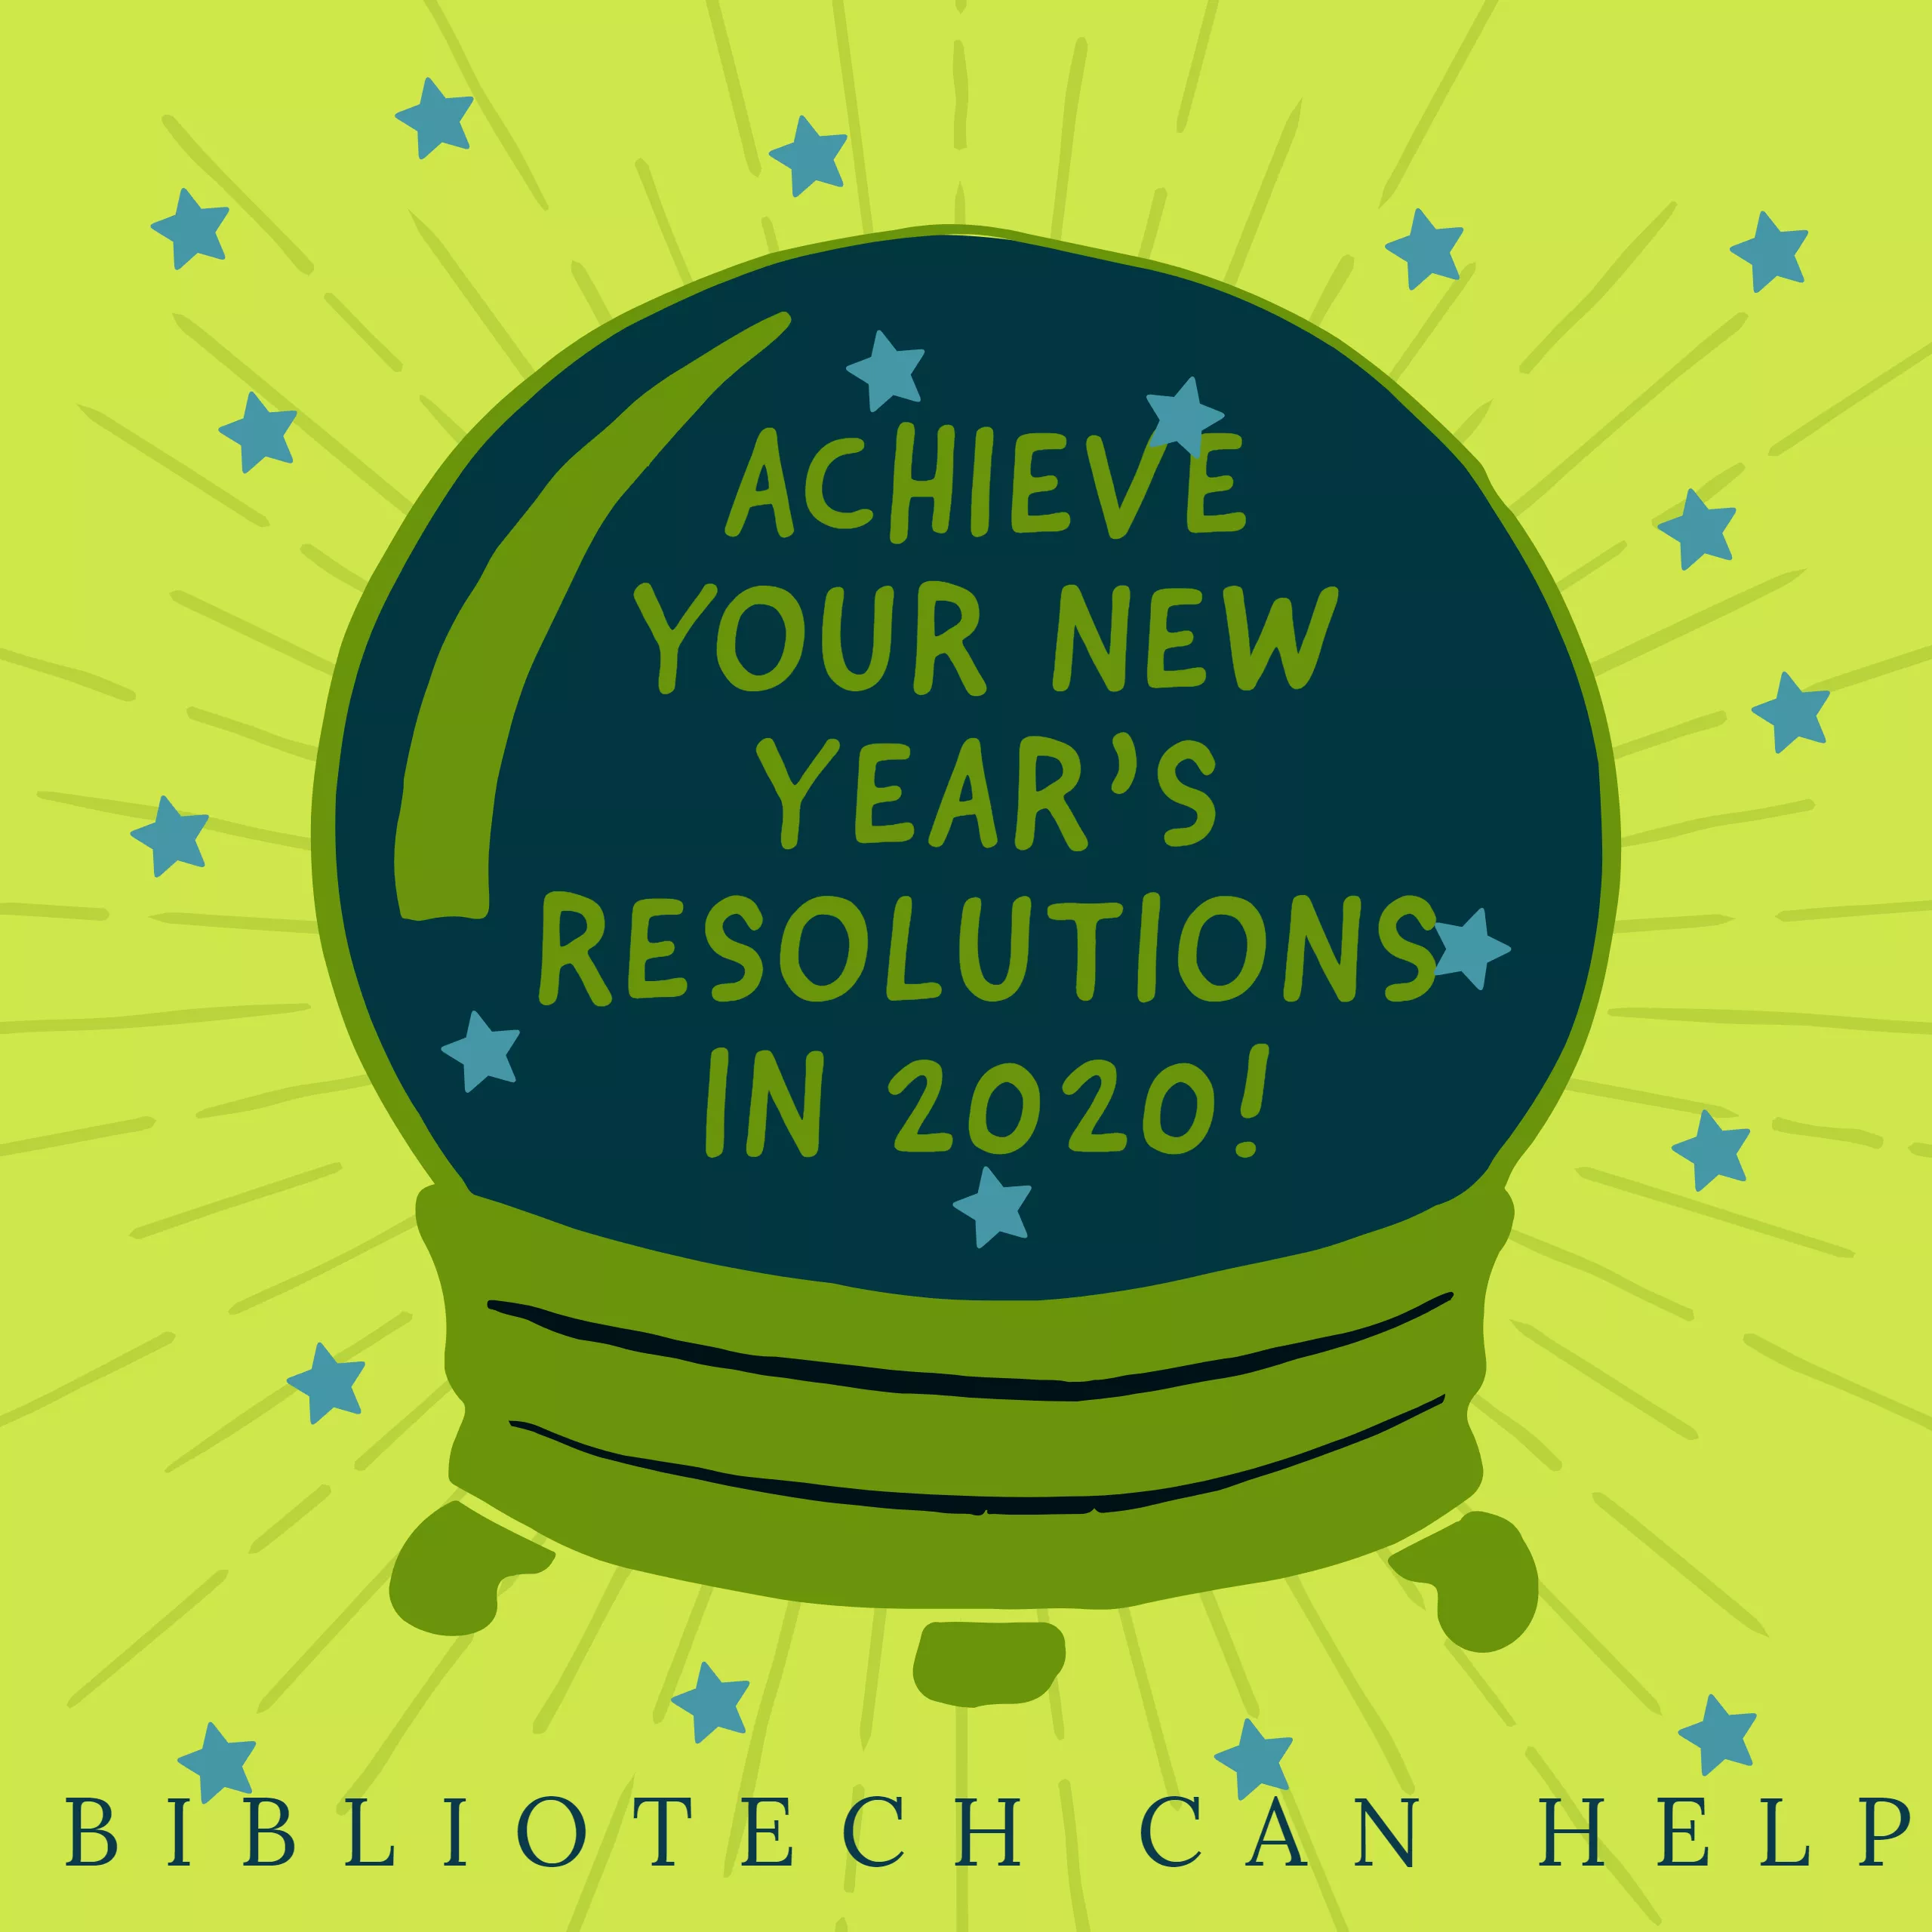 Achieve your 2020 resolutions with BiblioTech